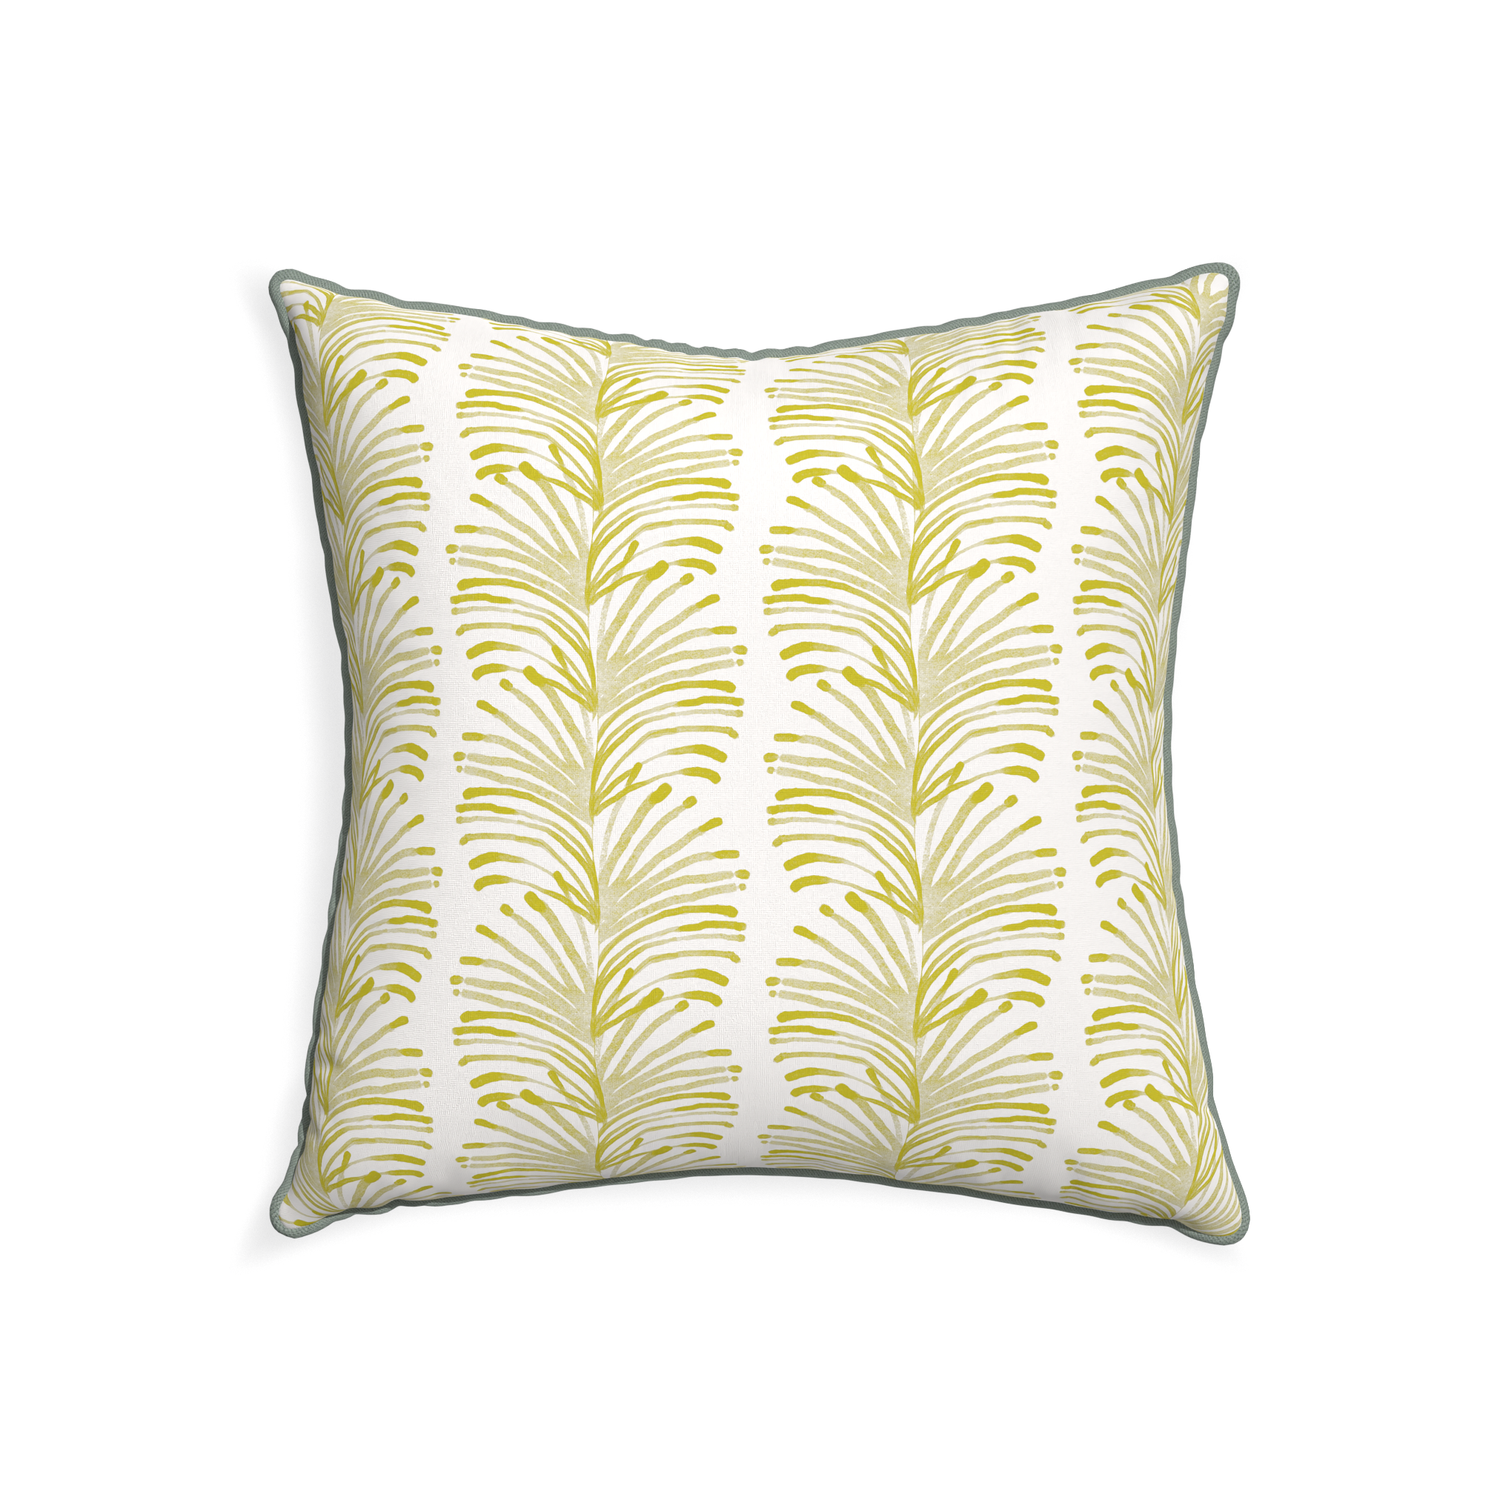 22-square emma chartreuse custom yellow stripe chartreusepillow with sage piping on white background